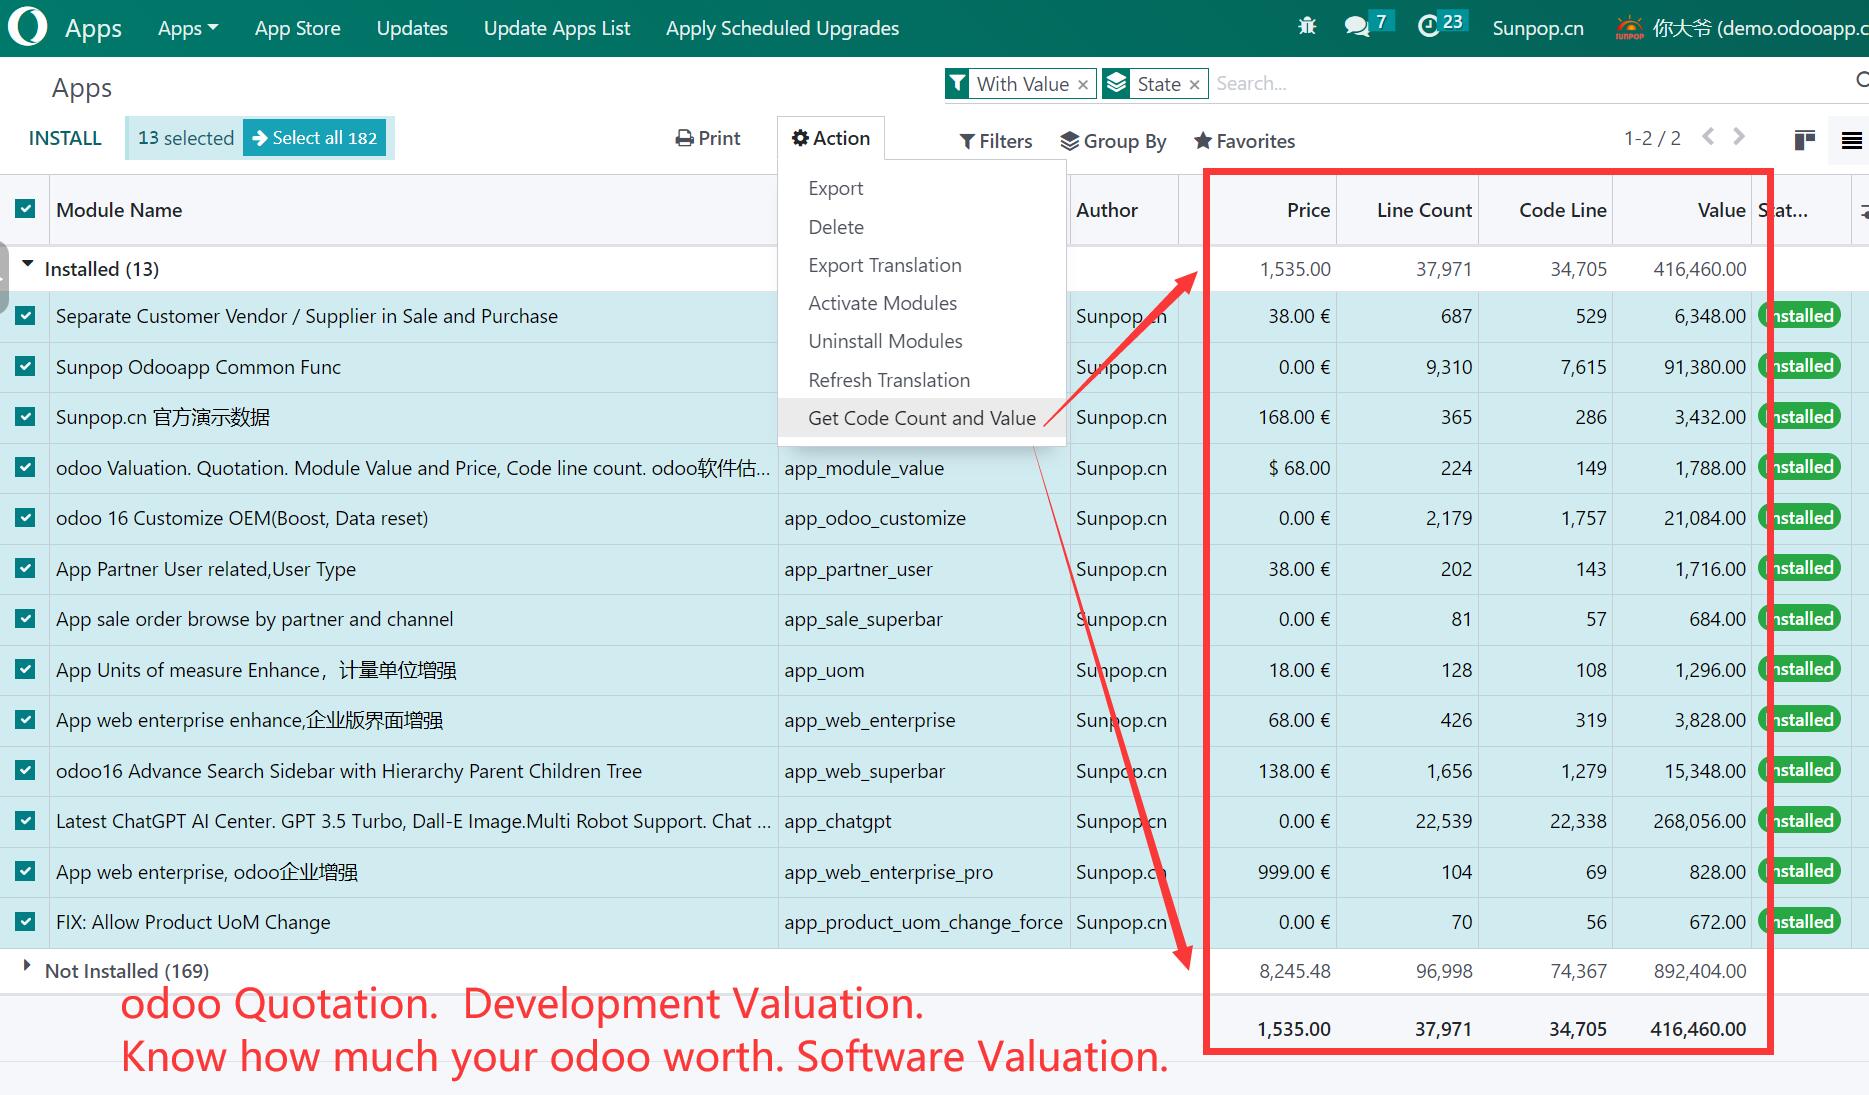 odoo Valuation. Module Value and Price, Code line count. 